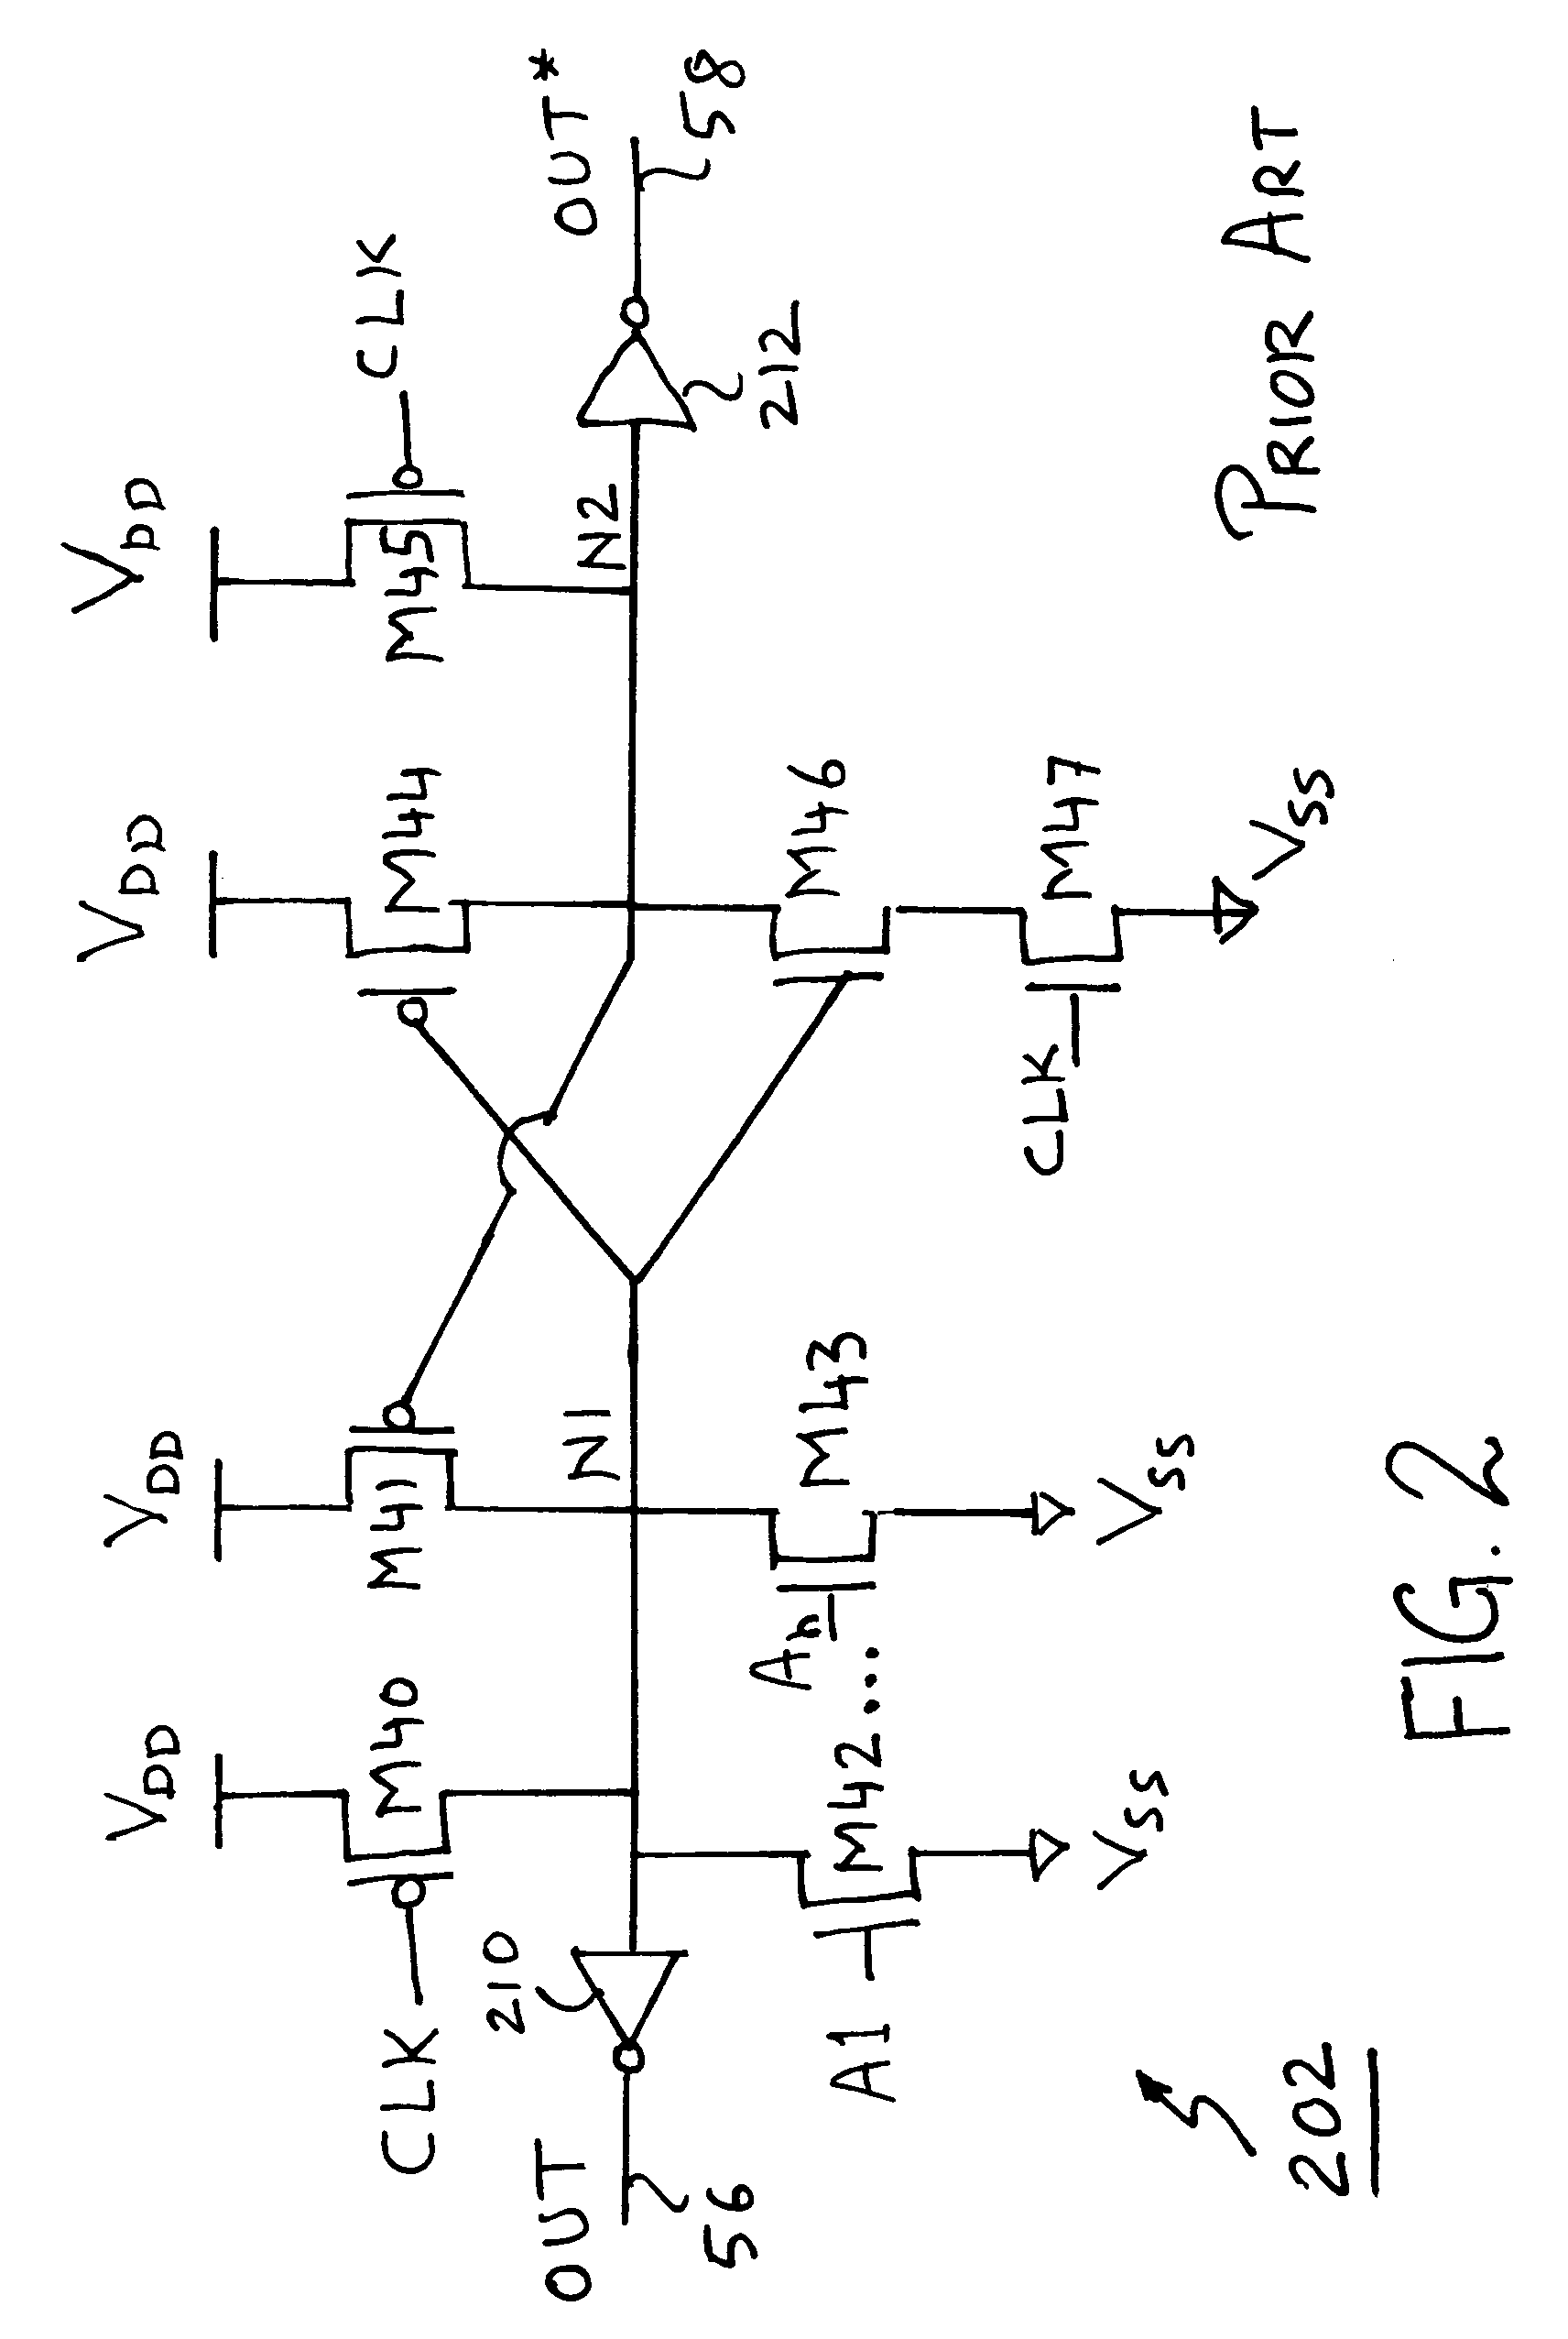 Reduced glitch dynamic logic circuit and method of synthesis for complementary oxide semiconductor (CMOS) and strained/unstrained silicon-on-insulator (SOI)